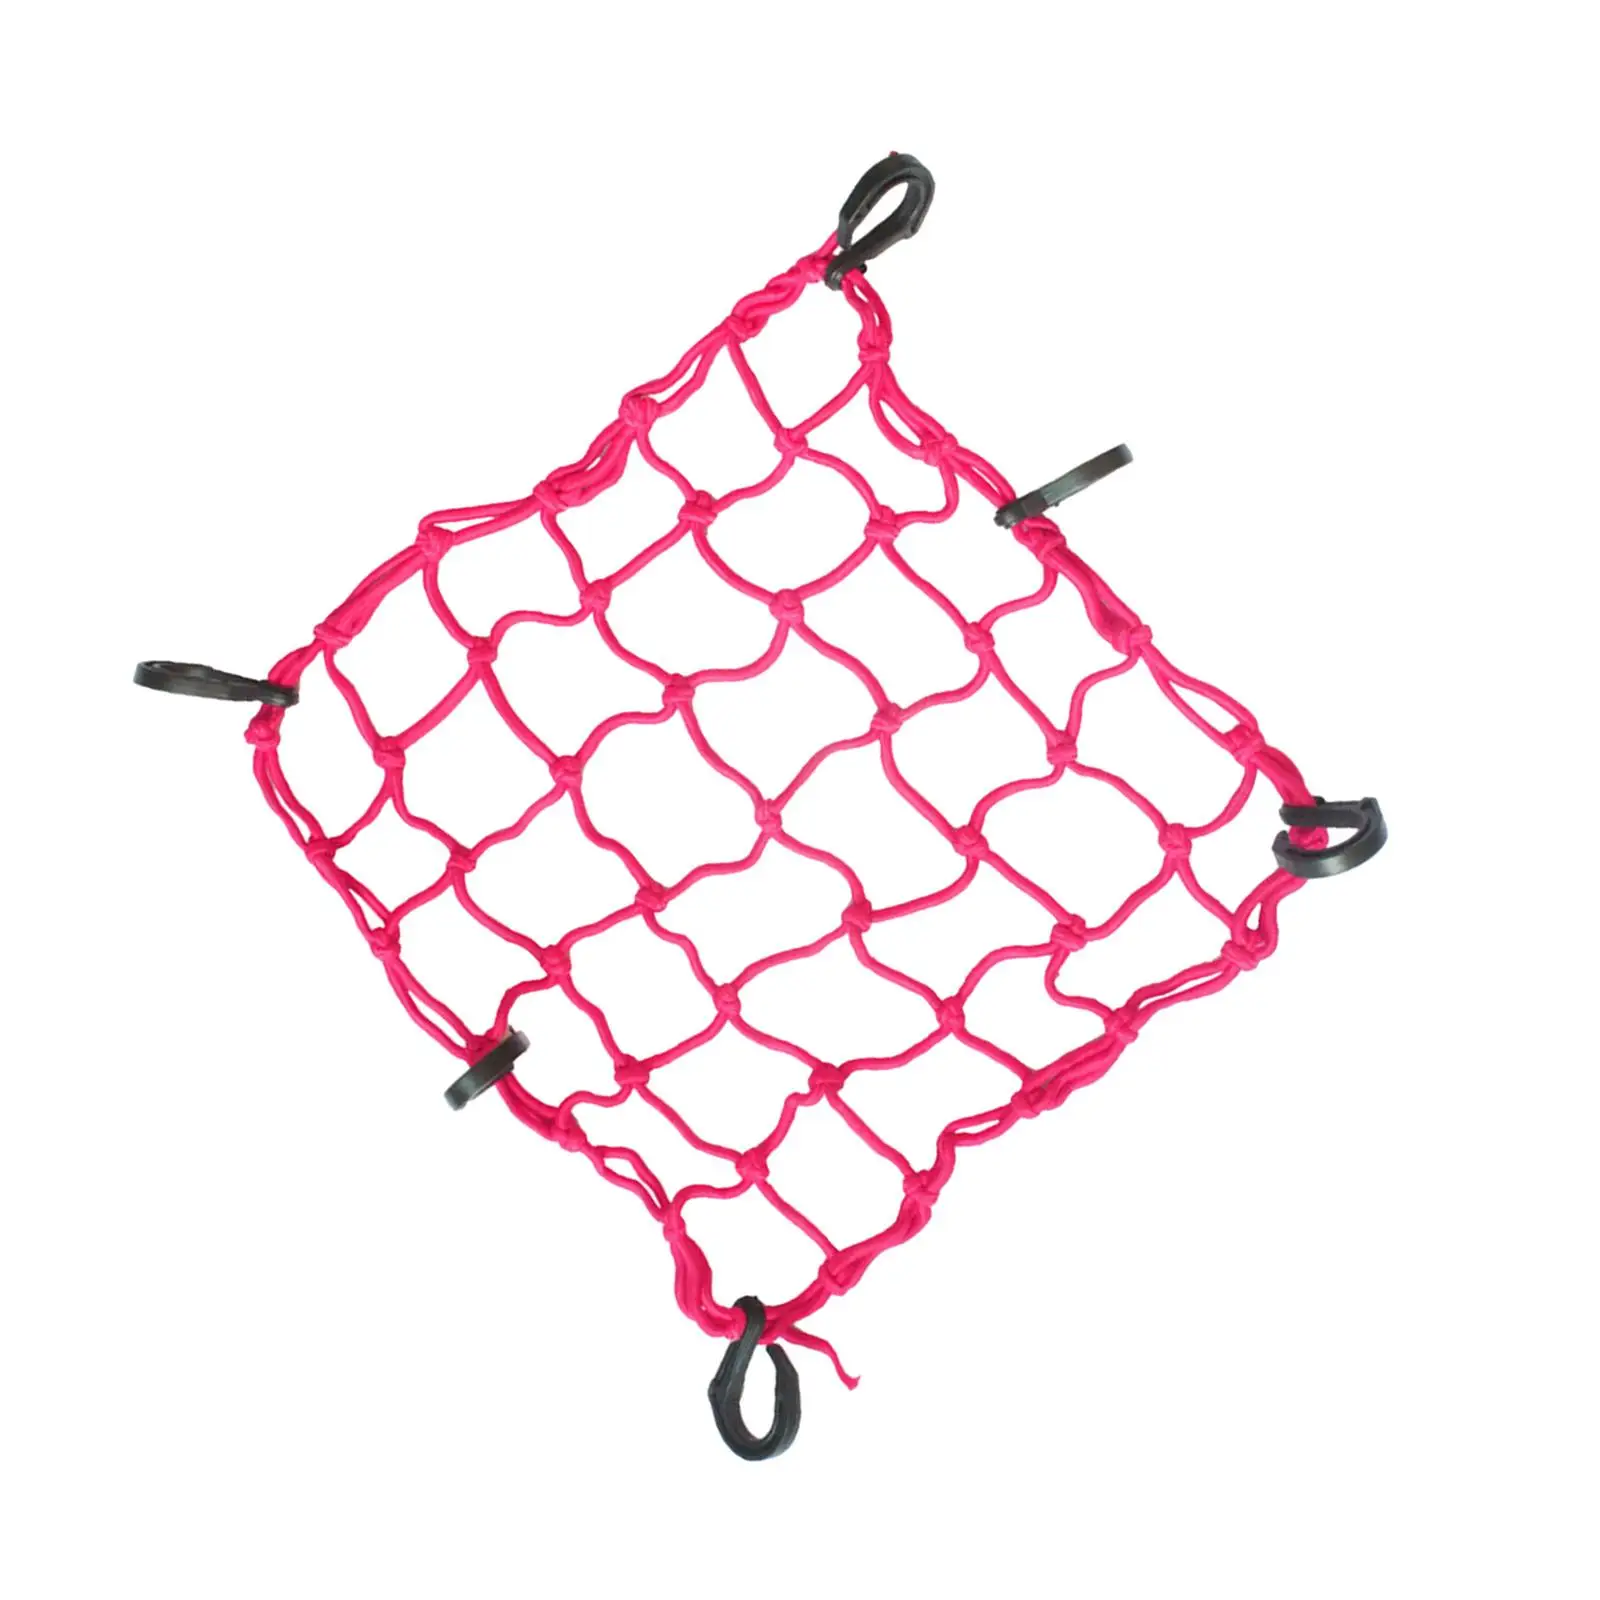 Motorcycle Top Box Cargo Net Stretchable Nets Cover 30x30cm Small Mesh